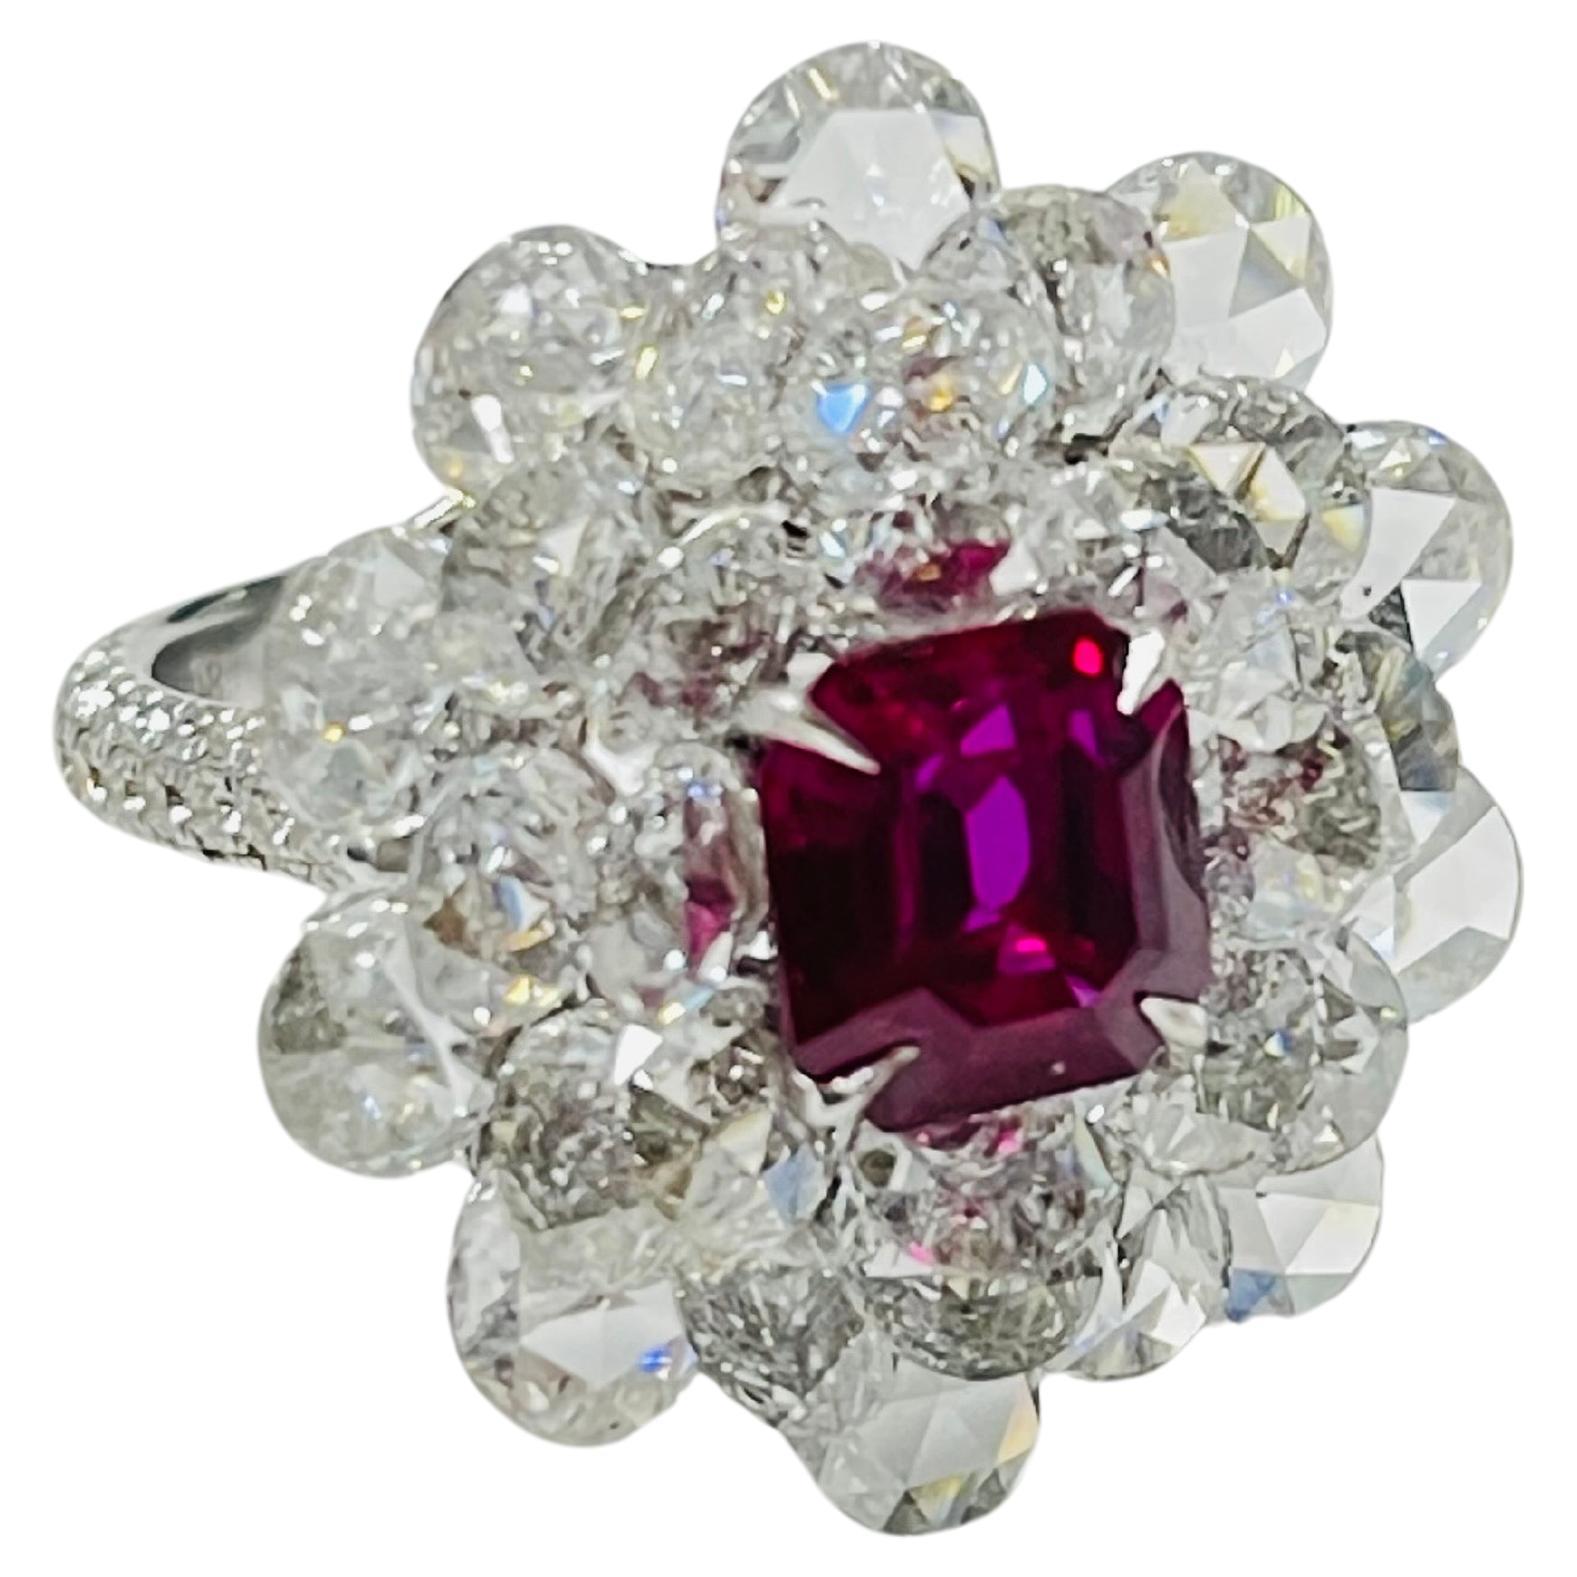 This truly one of a kind ring features Gublin and GIA certified gorgeous Burma unheated 3.15 carat Ruby nestled in a bed of beautiful white rose cut diamond weighing 4.54 carats /20 ( 4.7mm) and 3.04 carats /10 (5mm) with VVS clarity and GH color